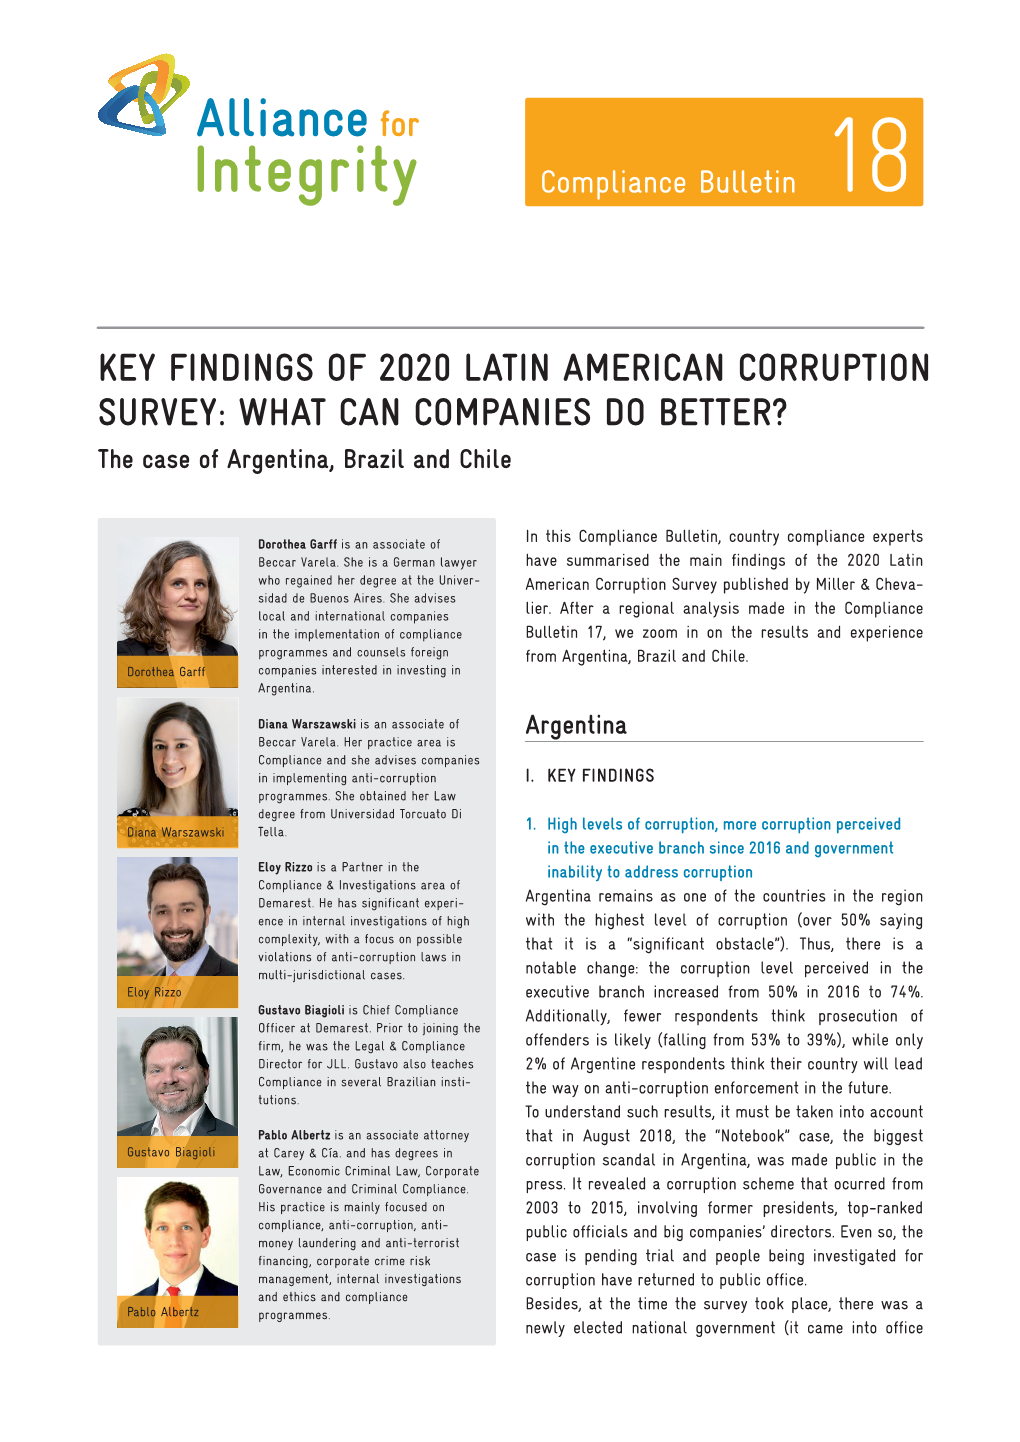 KEY FINDINGS of 2020 LATIN AMERICAN CORRUPTION SURVEY: WHAT CAN COMPANIES DO BETTER? the Case of Argentina, Brazil and Chile